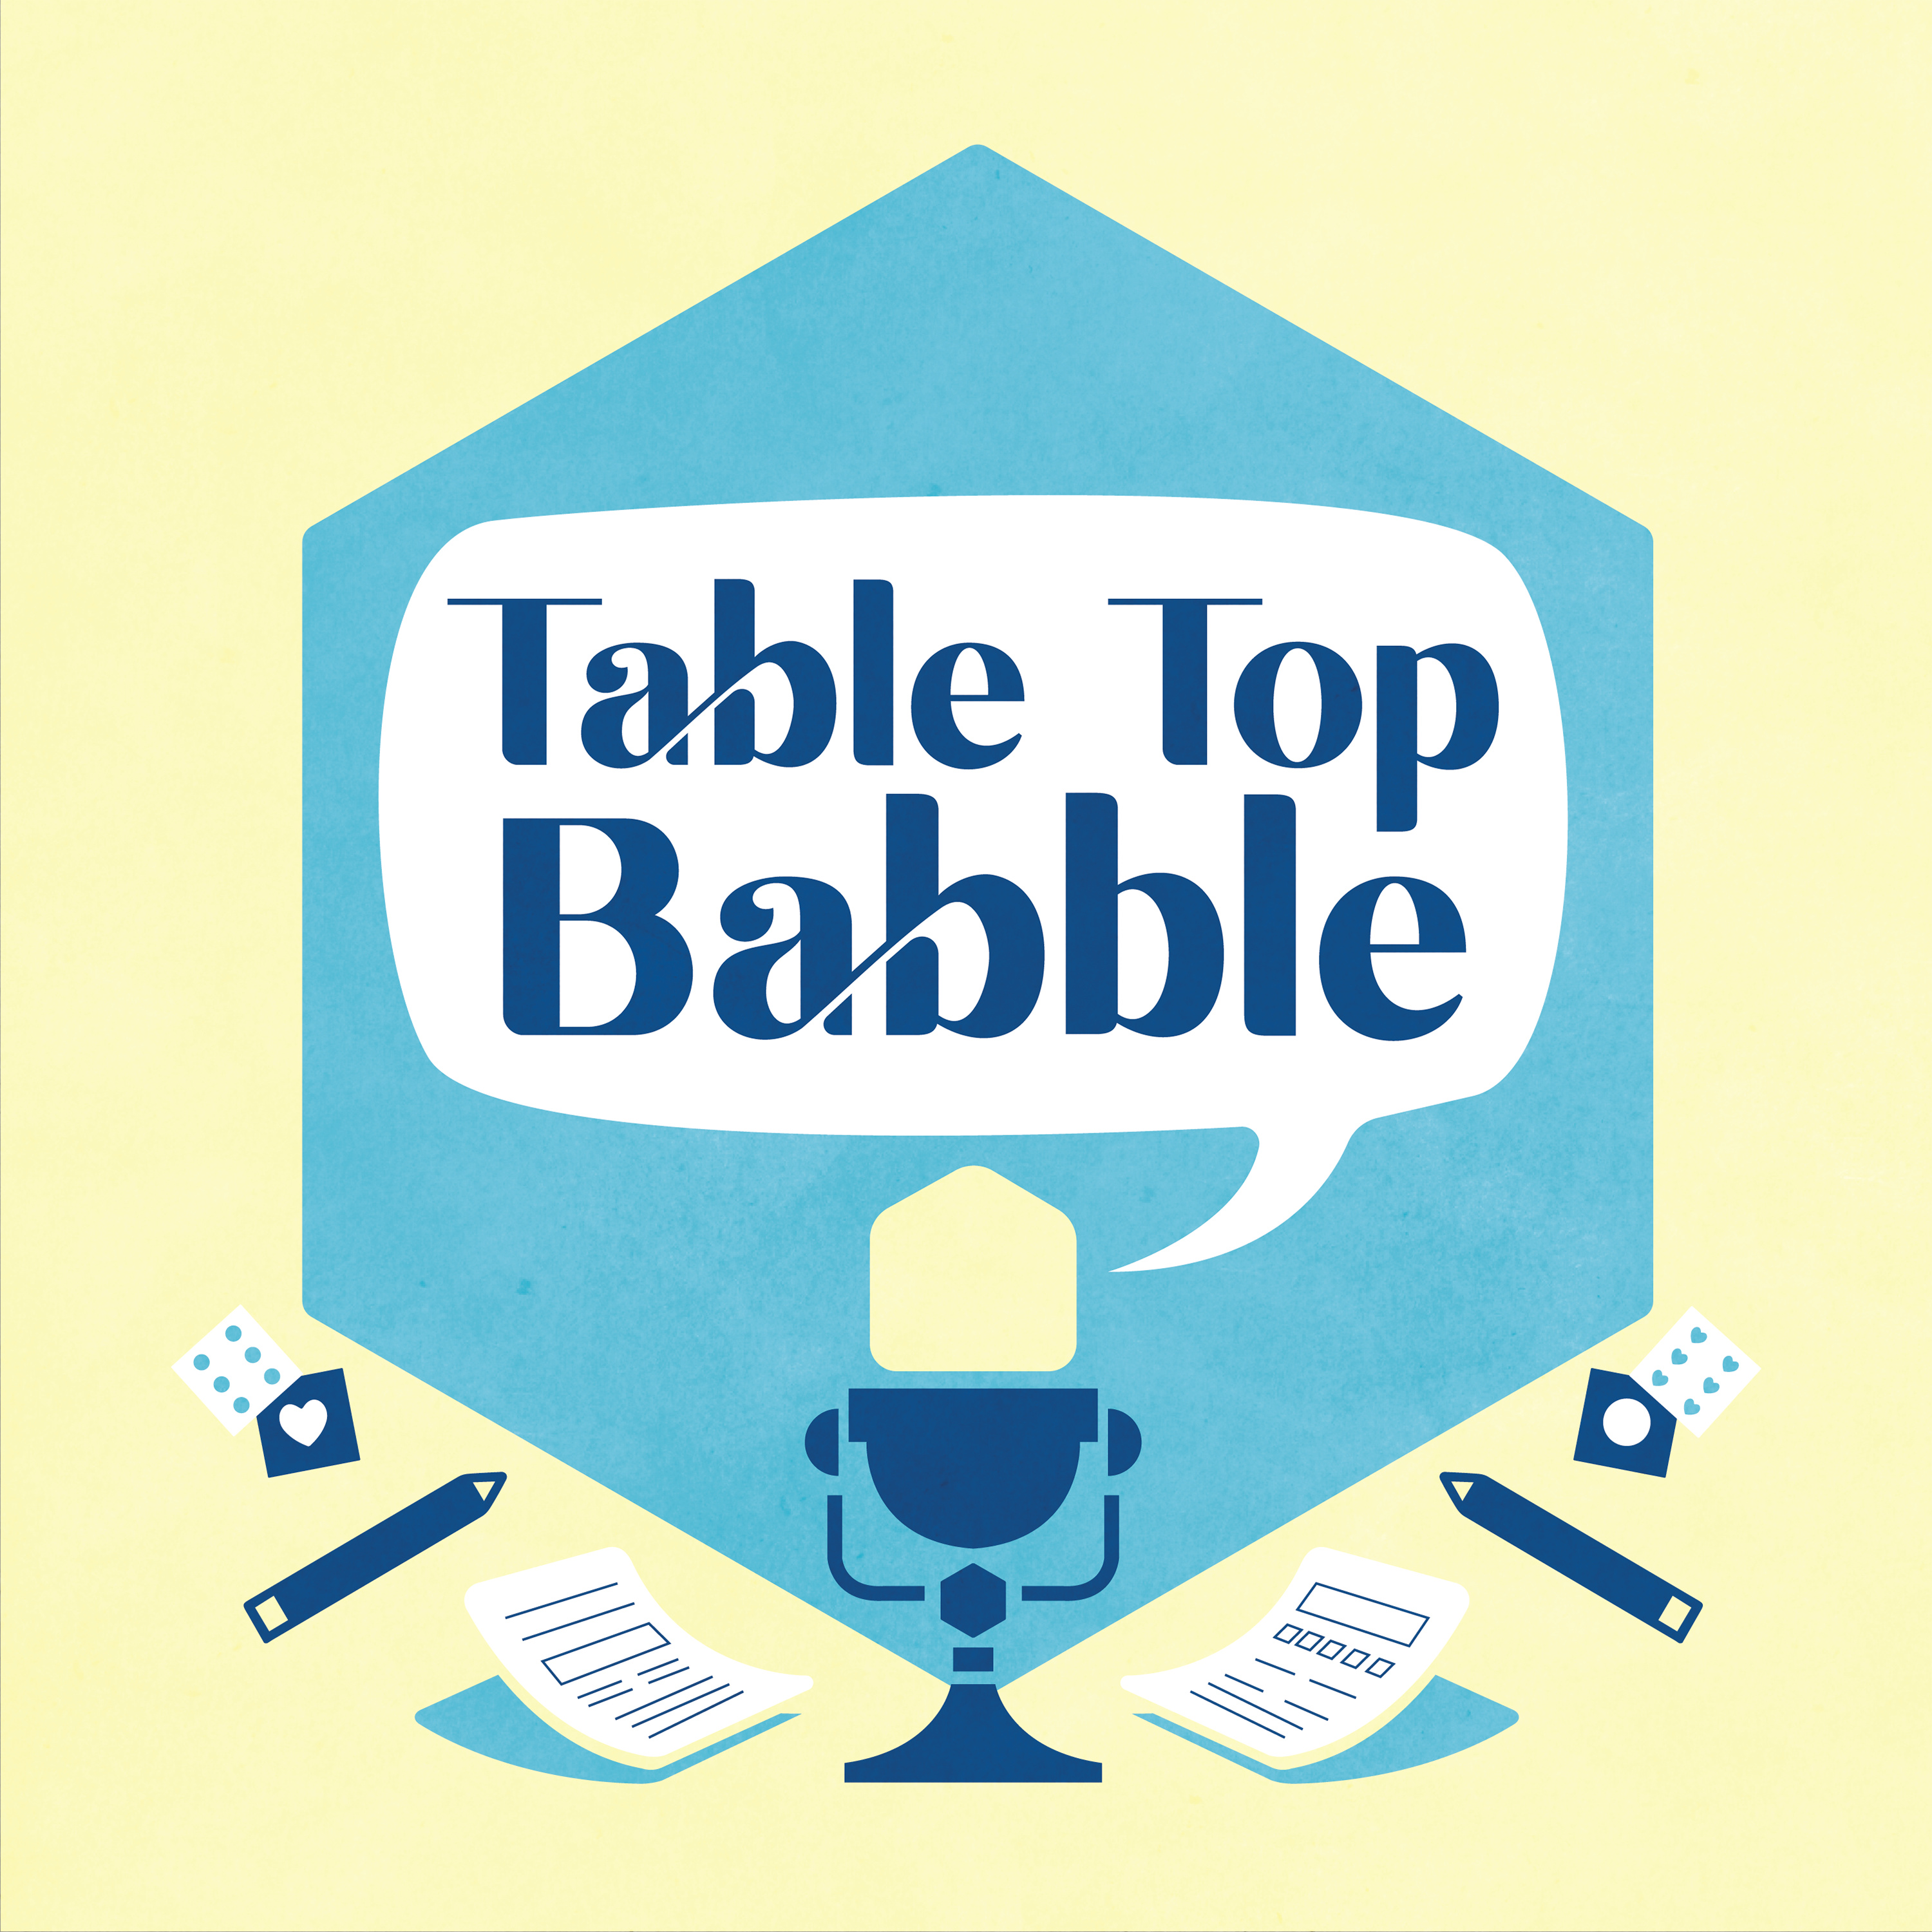 Table Top Babble